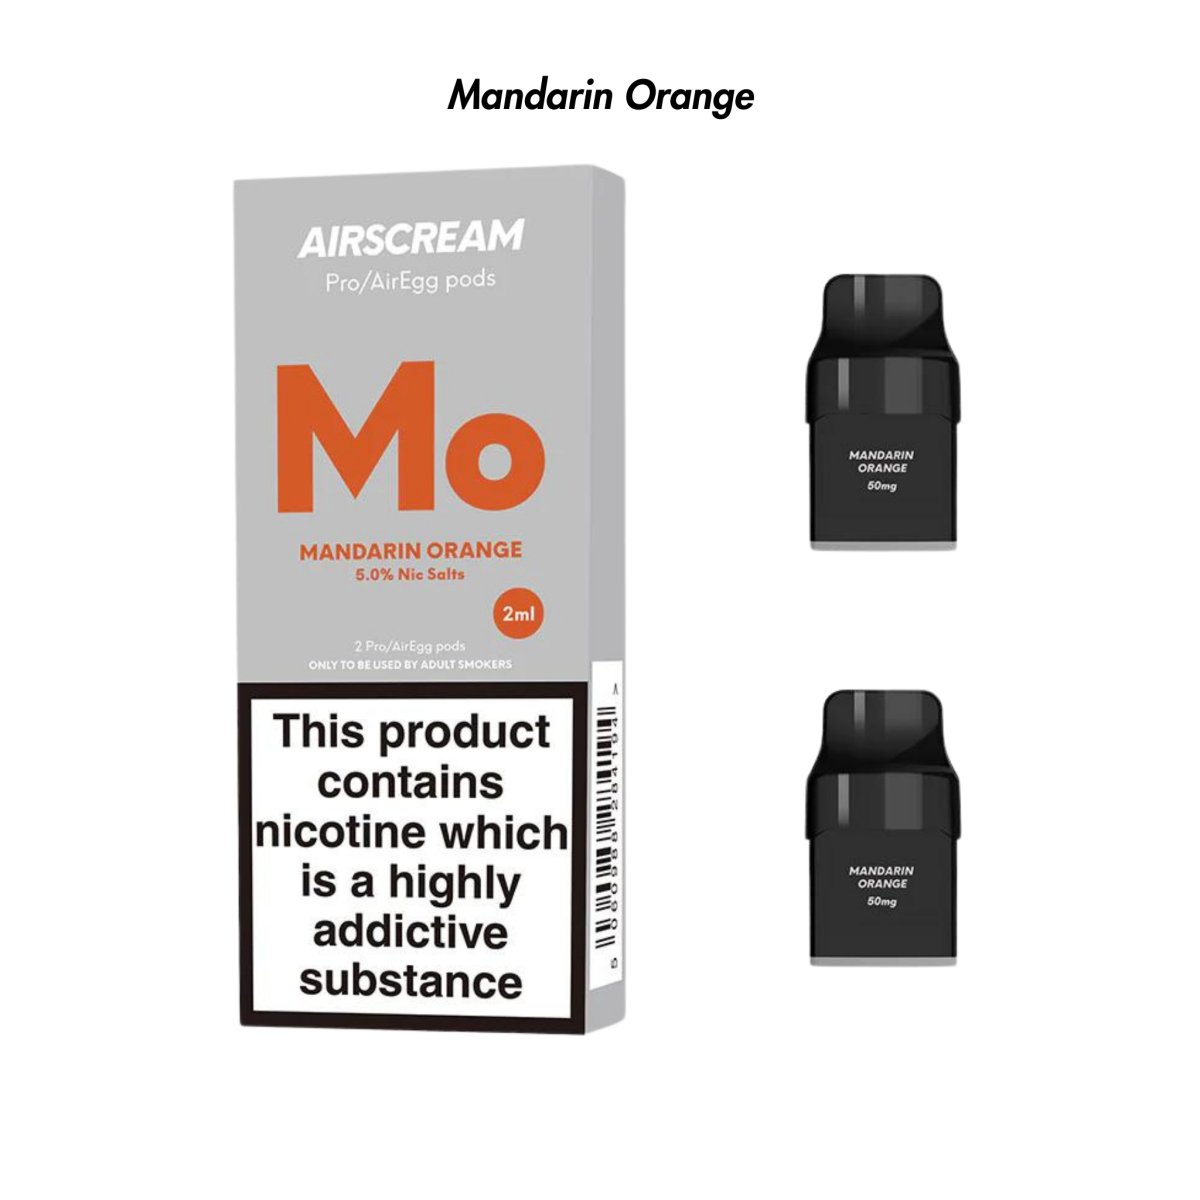 Mandarin Orange Prefilled Airscream Pro/AirEgg Pods from The Smoke Organic Store with Fast Delivery in South Africa